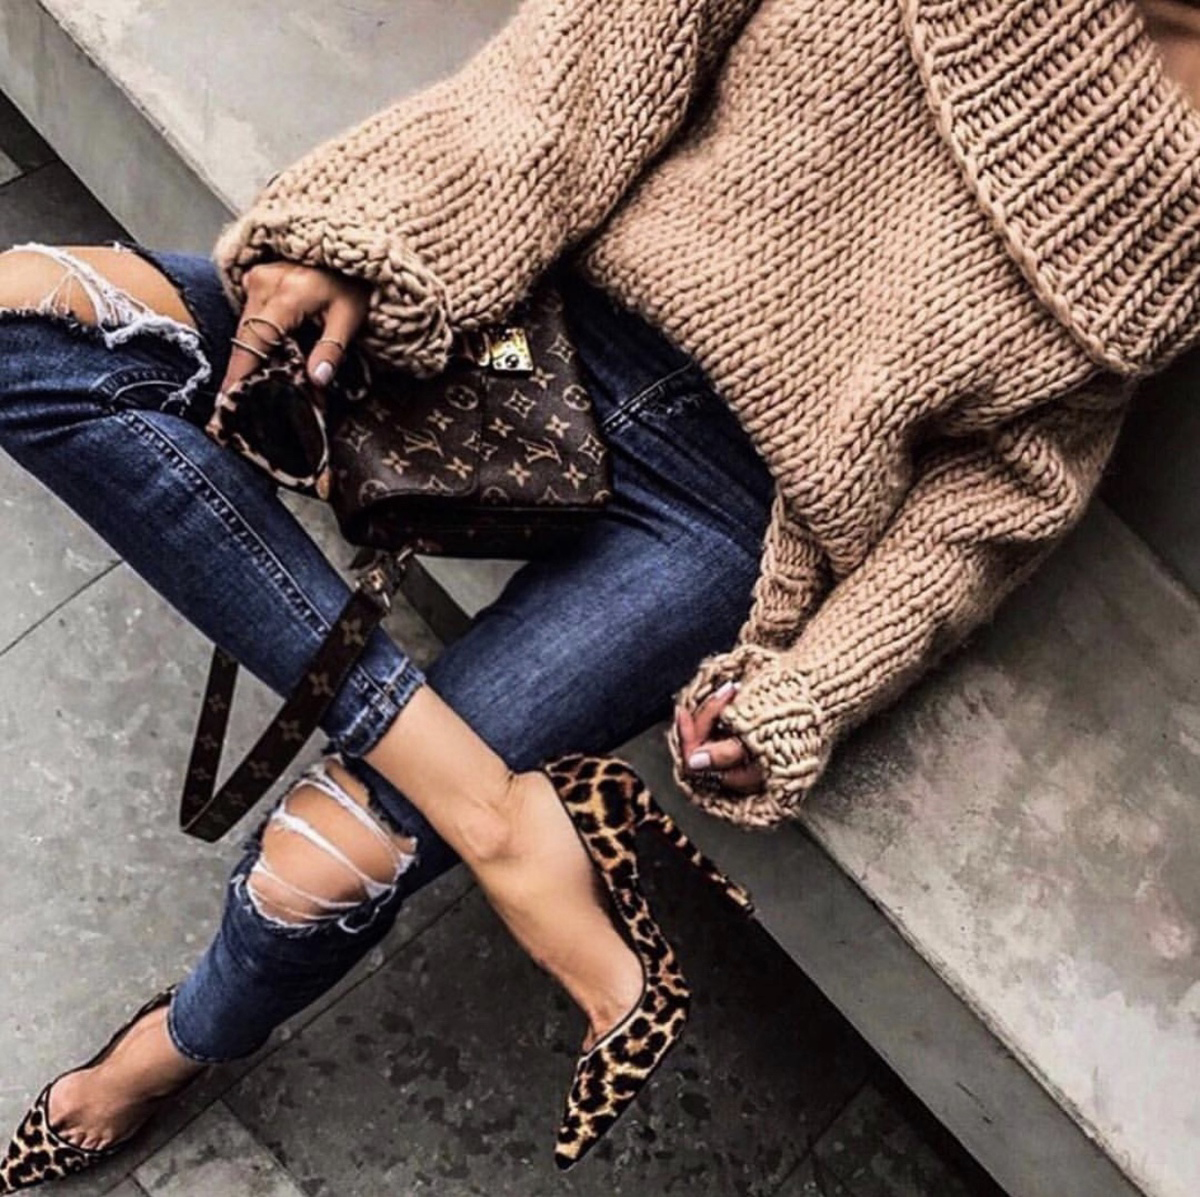 Fall Must Have: Off The Shoulder Sweater